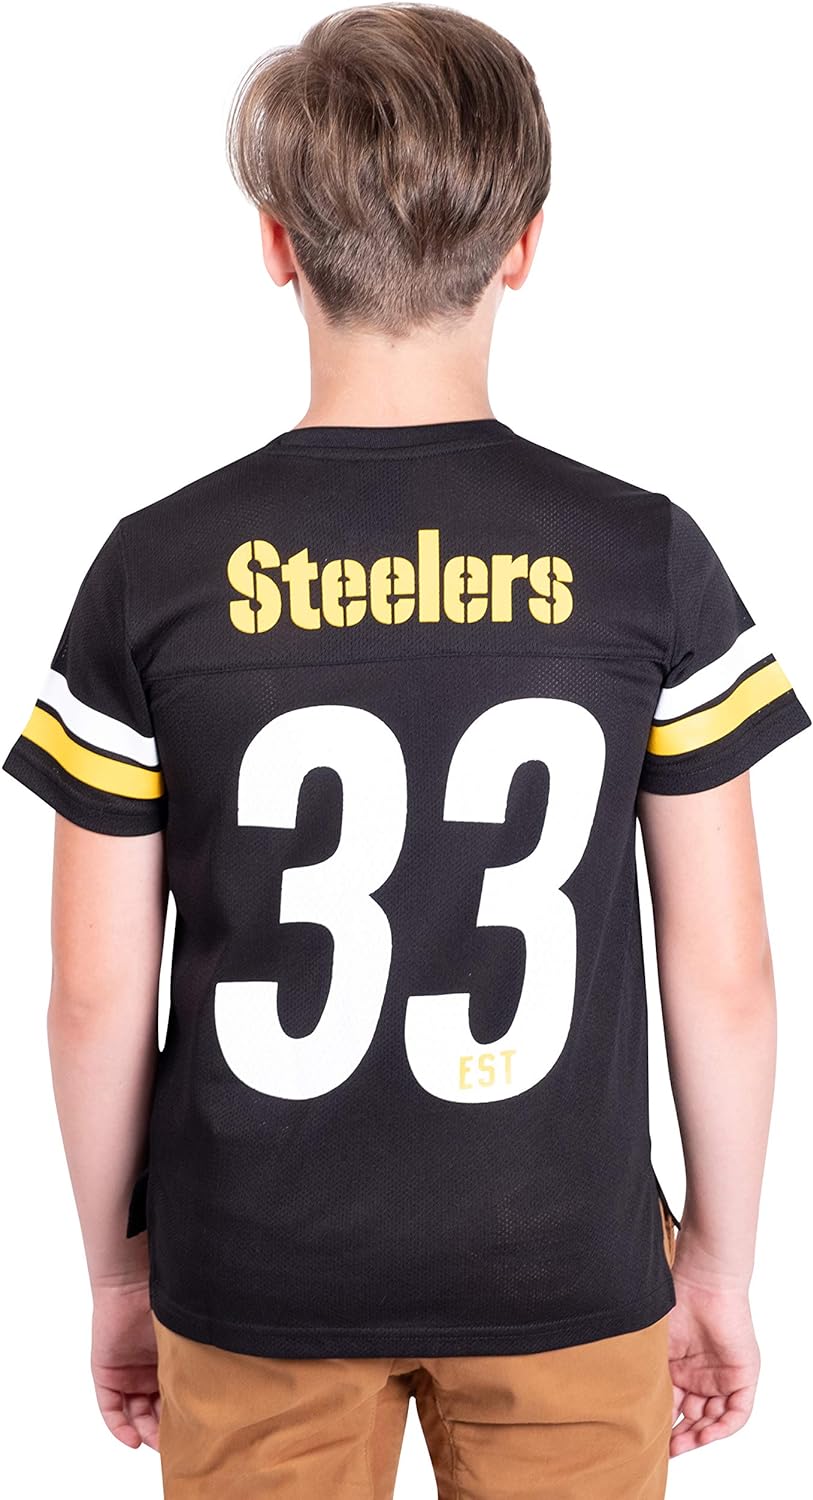 Ultra Game NFL Pittsburgh Steelers Youth Soft Mesh Vintage Jersey T-Shirt|Pittsburgh Steelers